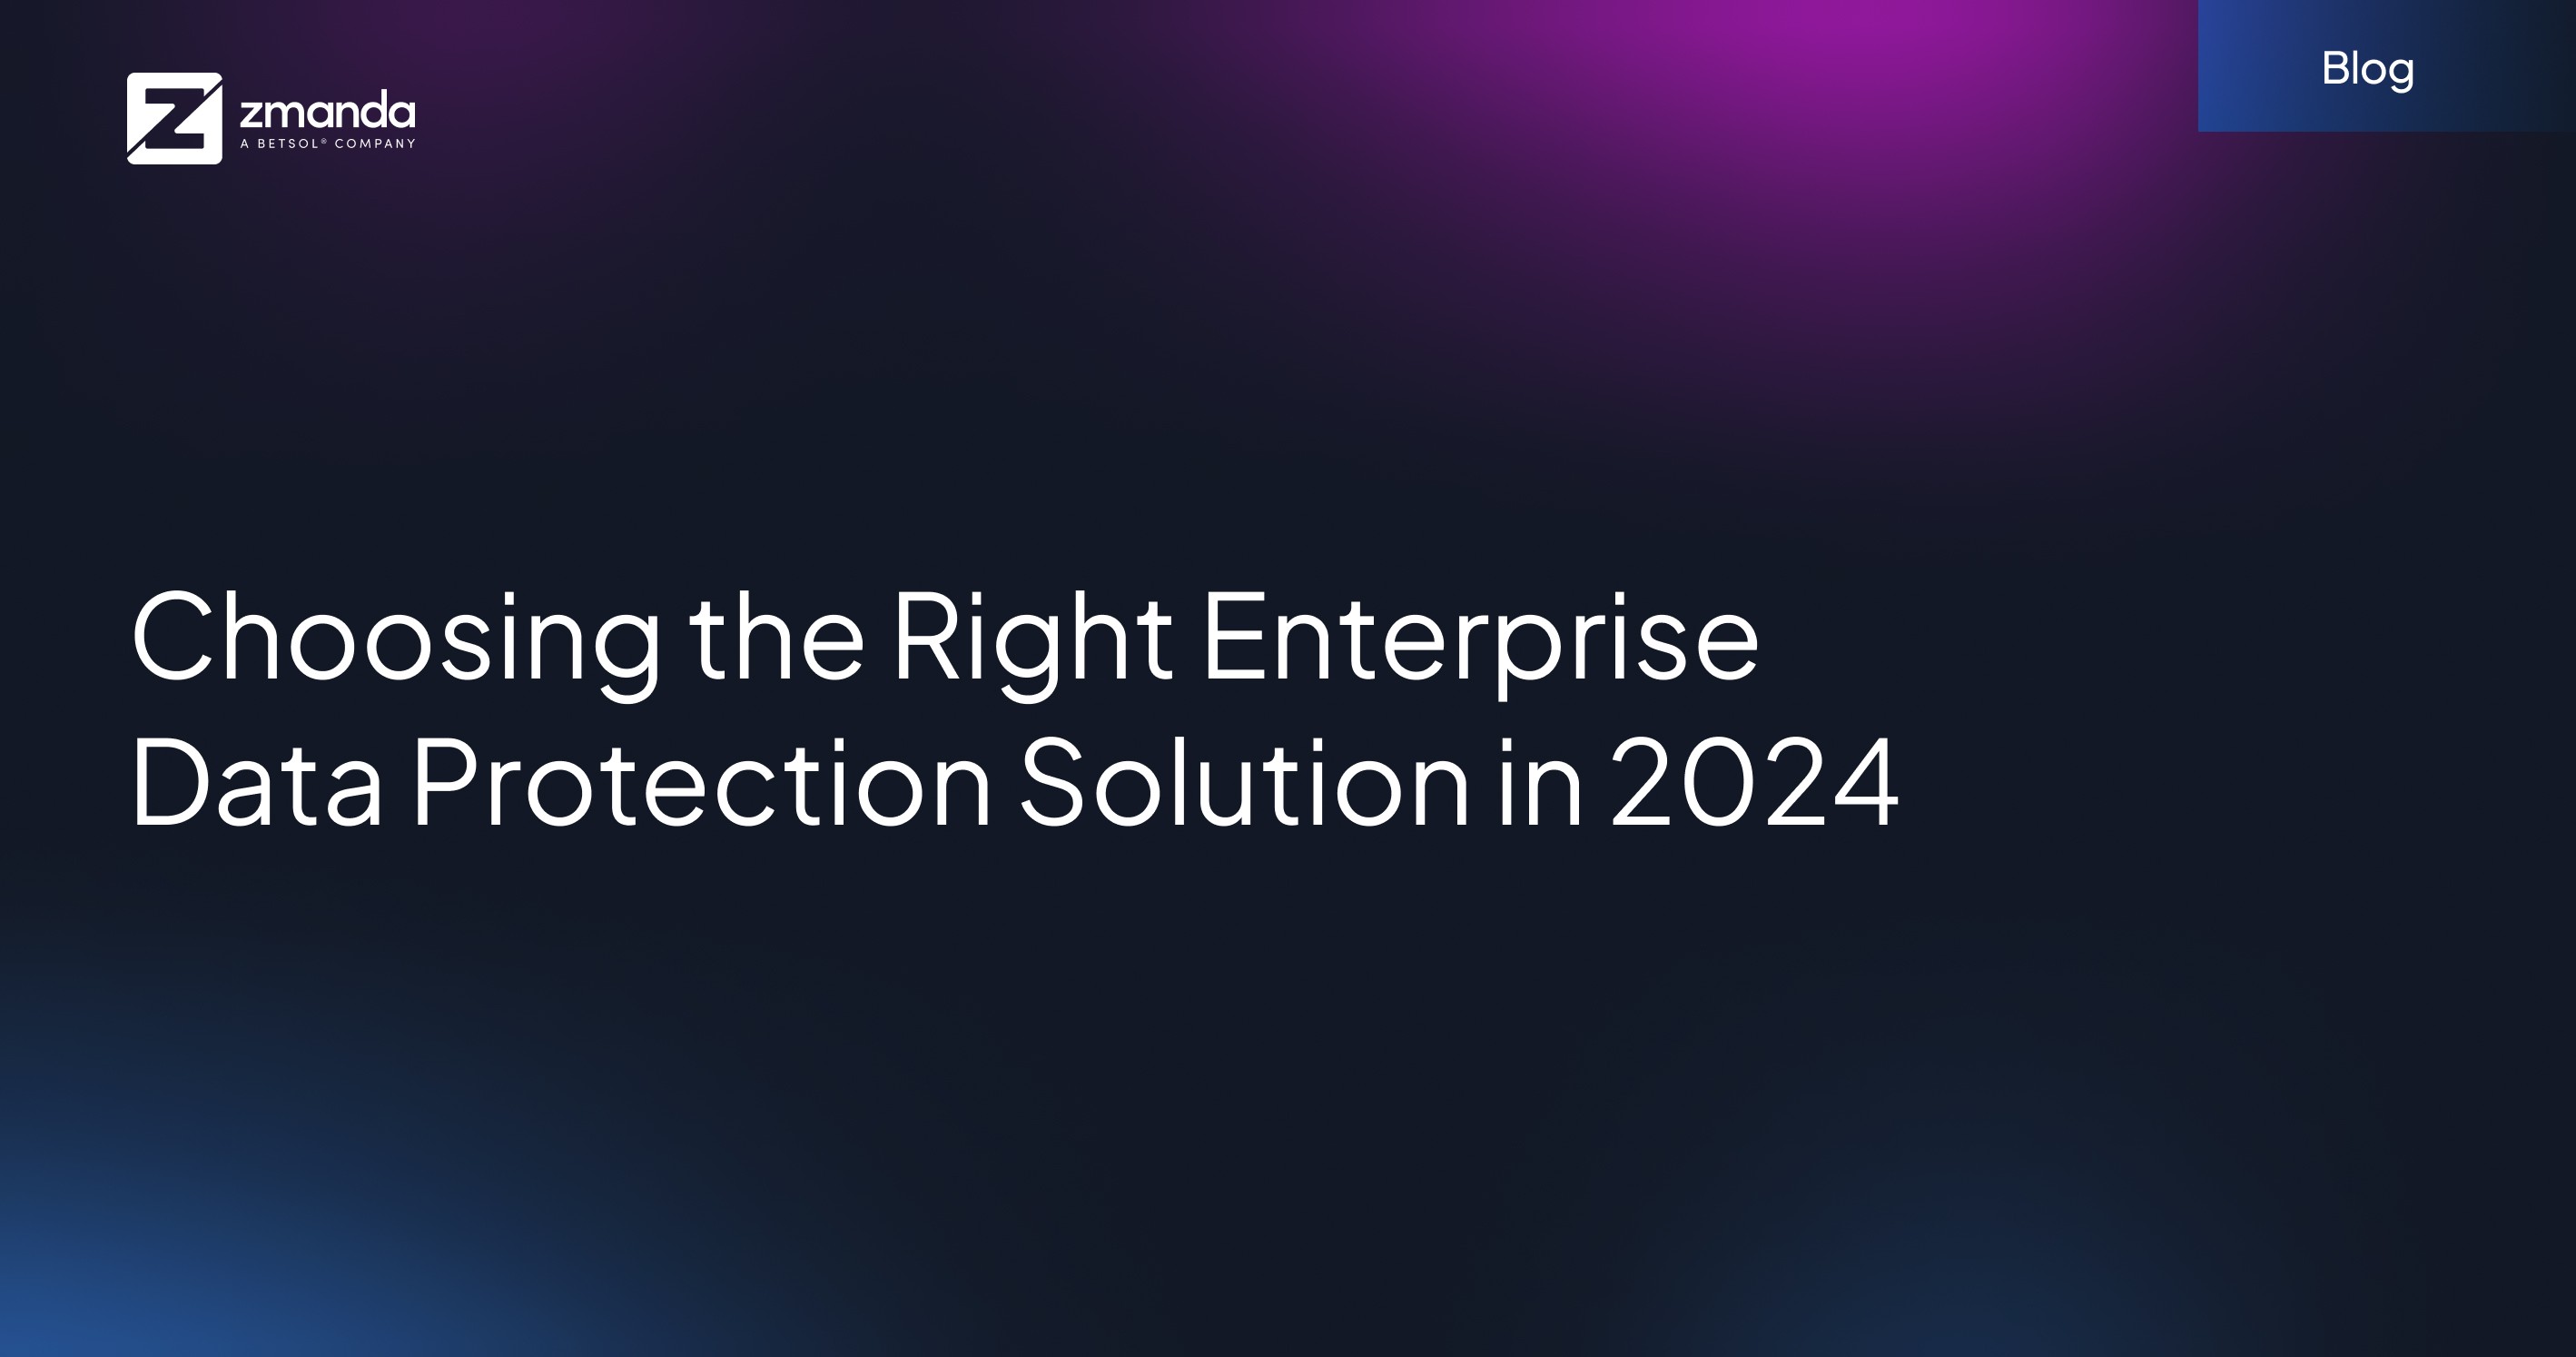 Choosing the Right Enterprise Data Protection Solution in 2024